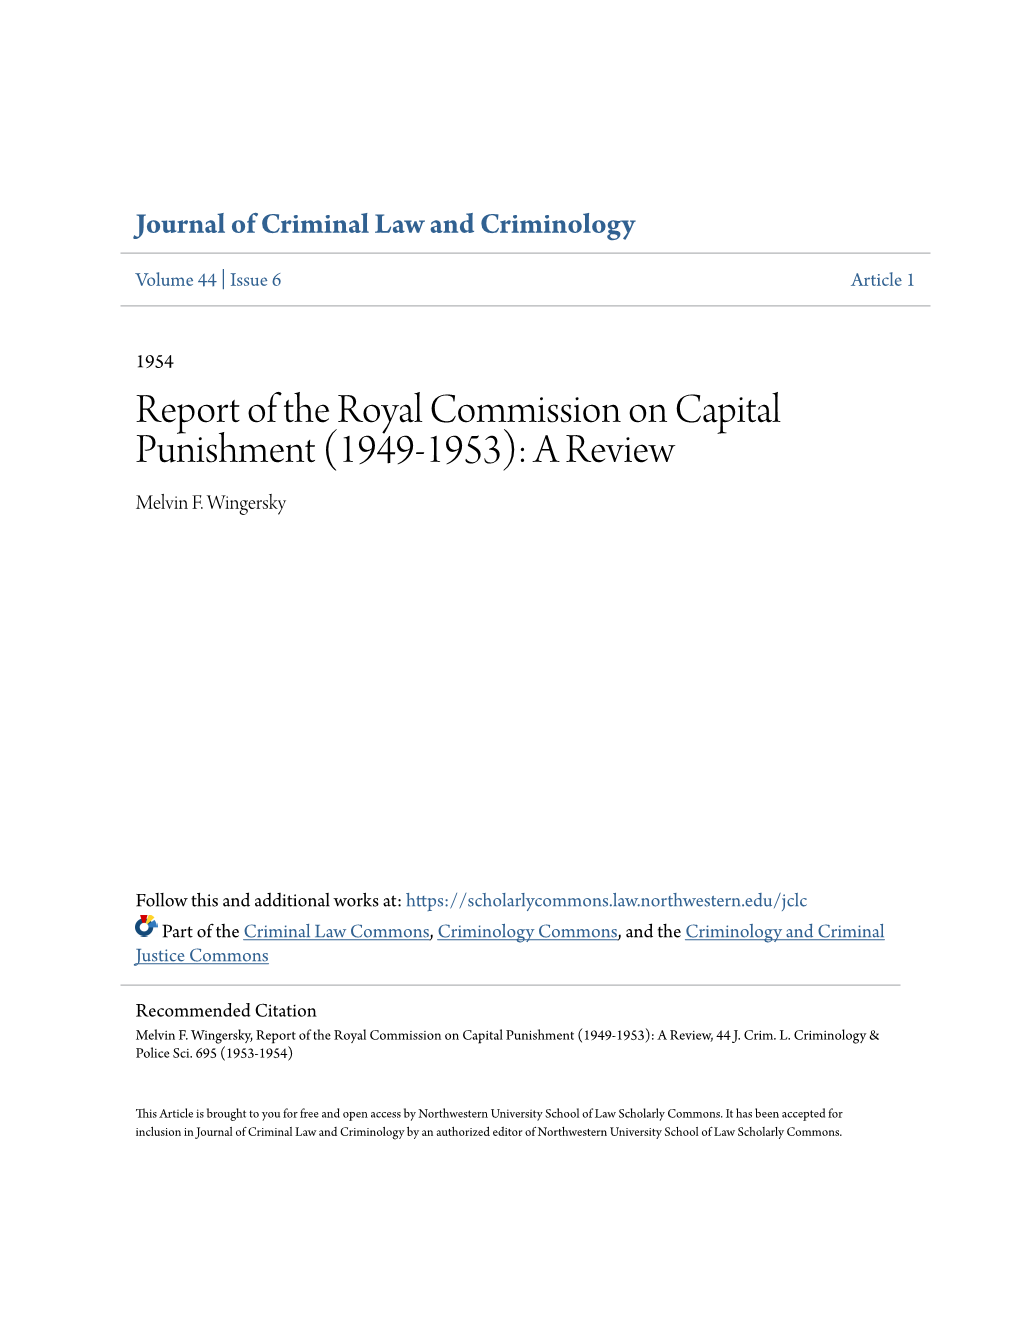 Report of the Royal Commission on Capital Punishment (1949-1953): a Review Melvin F